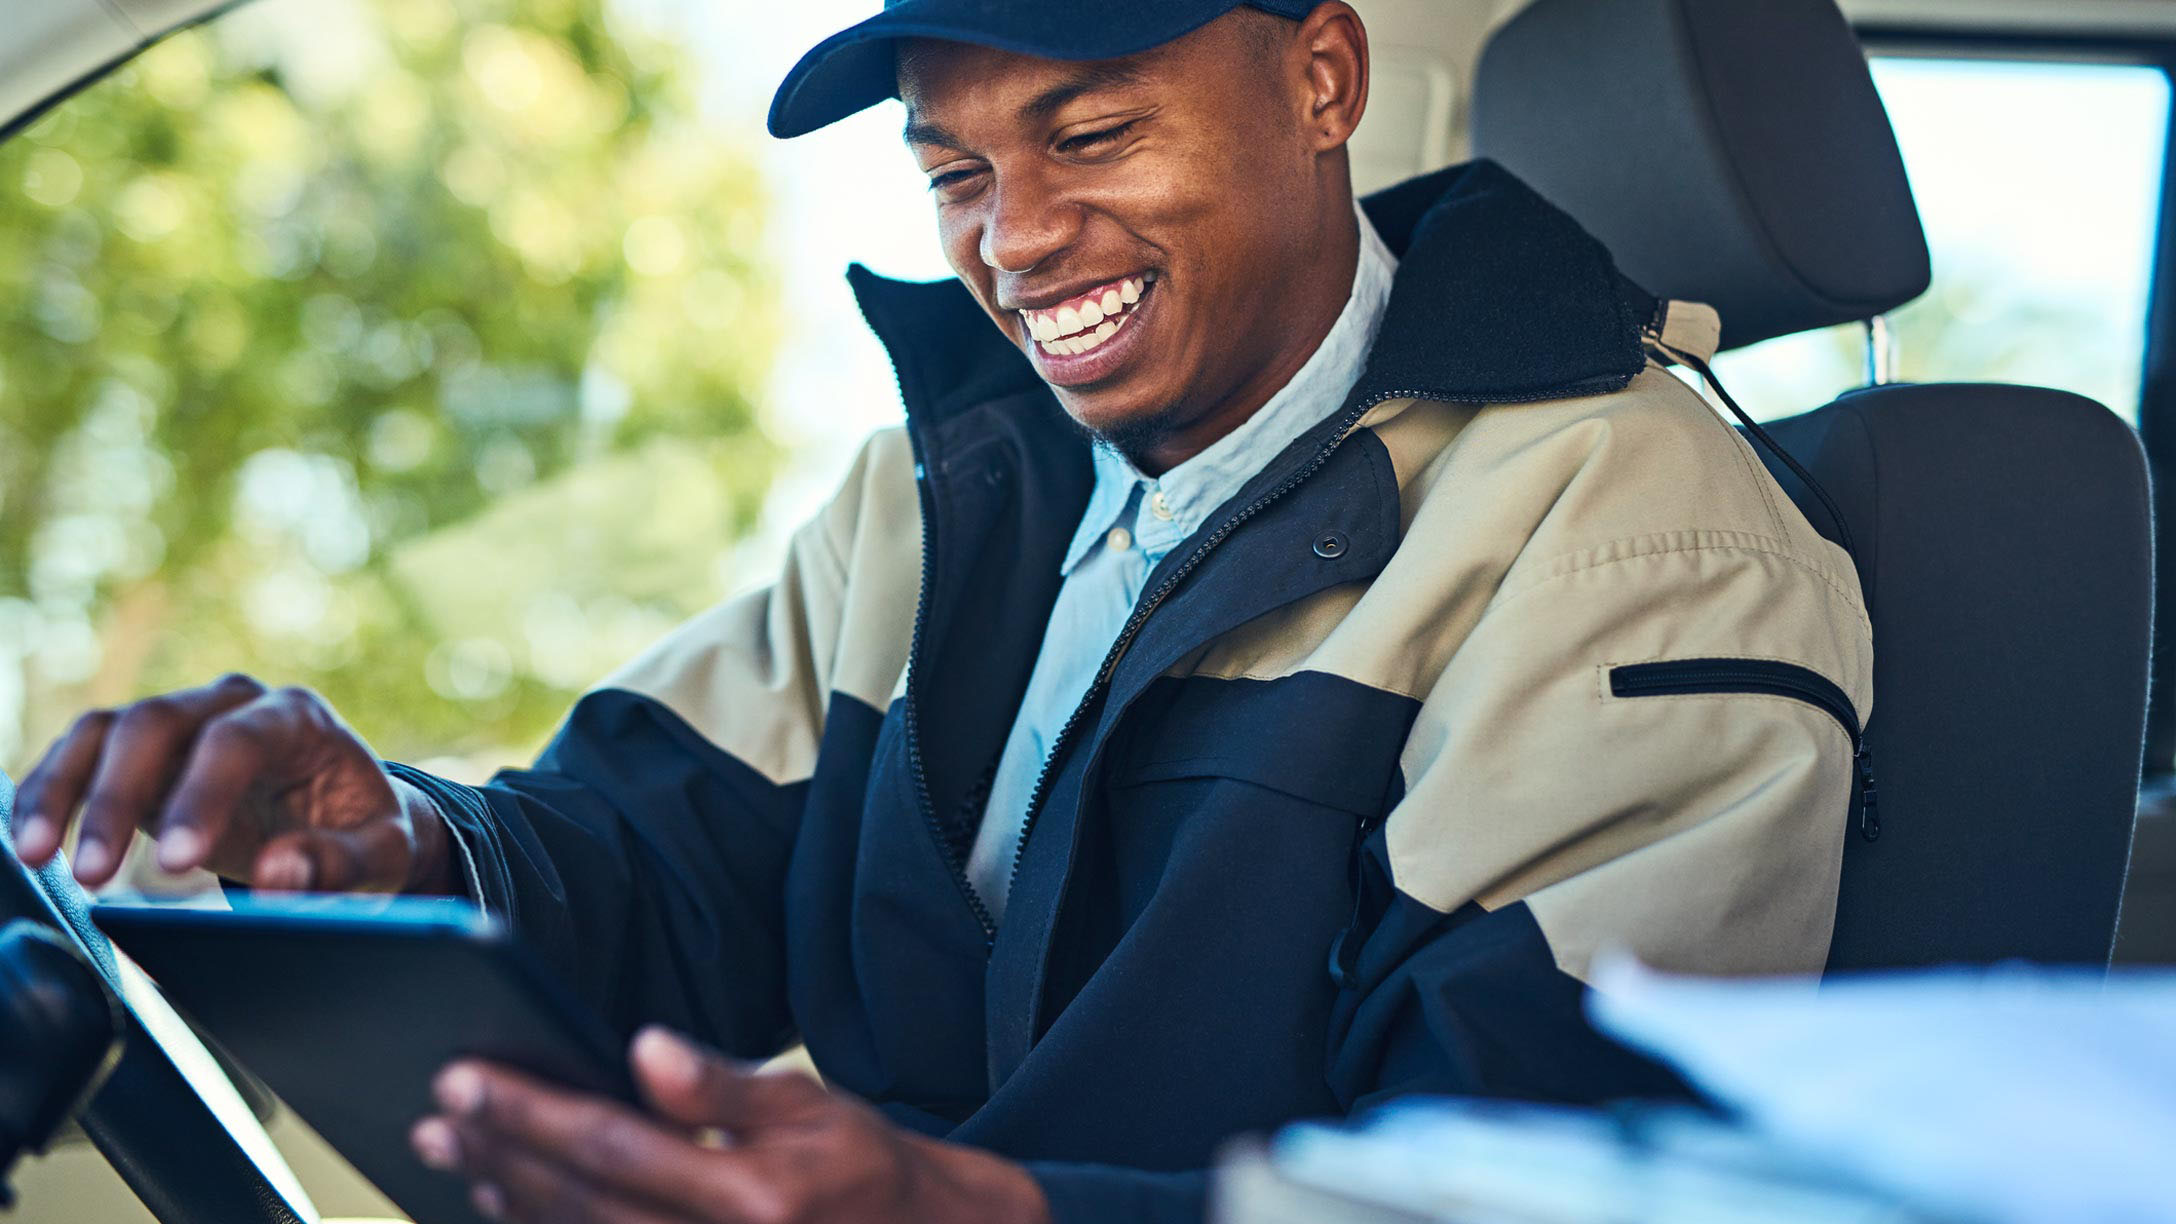 Smiling male driver holding an ELD tablet